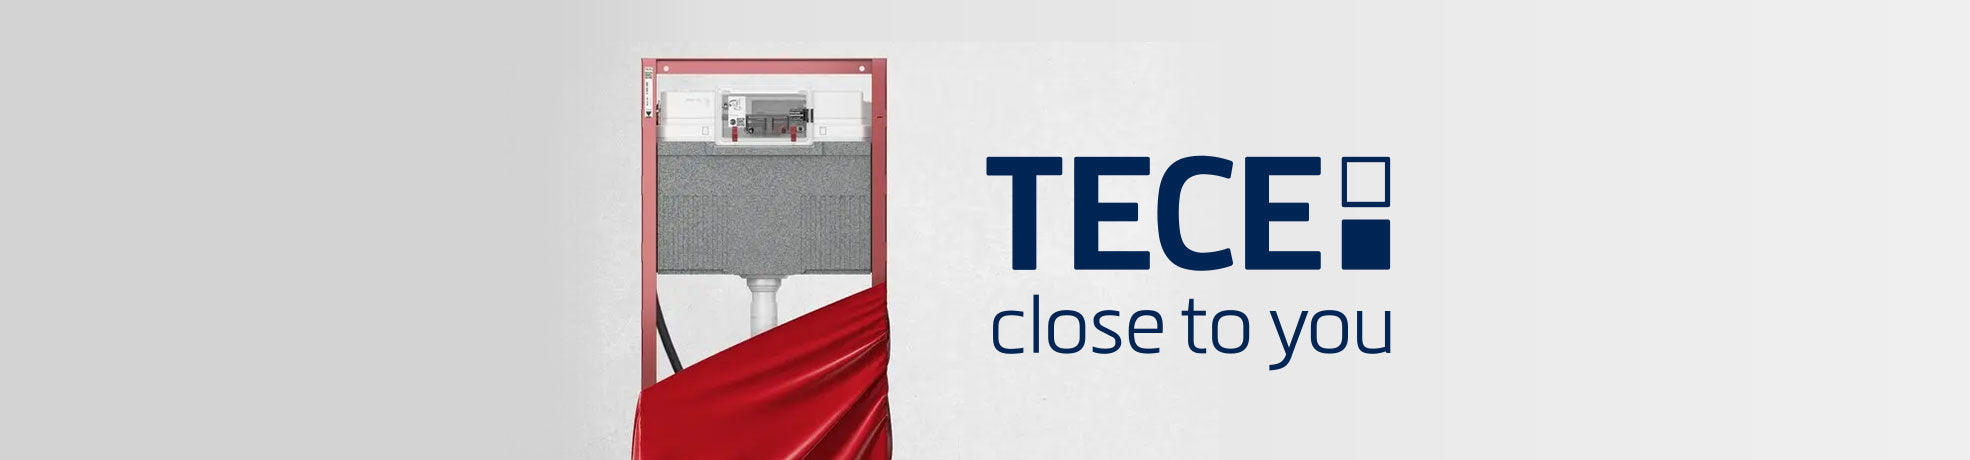 TECE Universal Toilet Systems